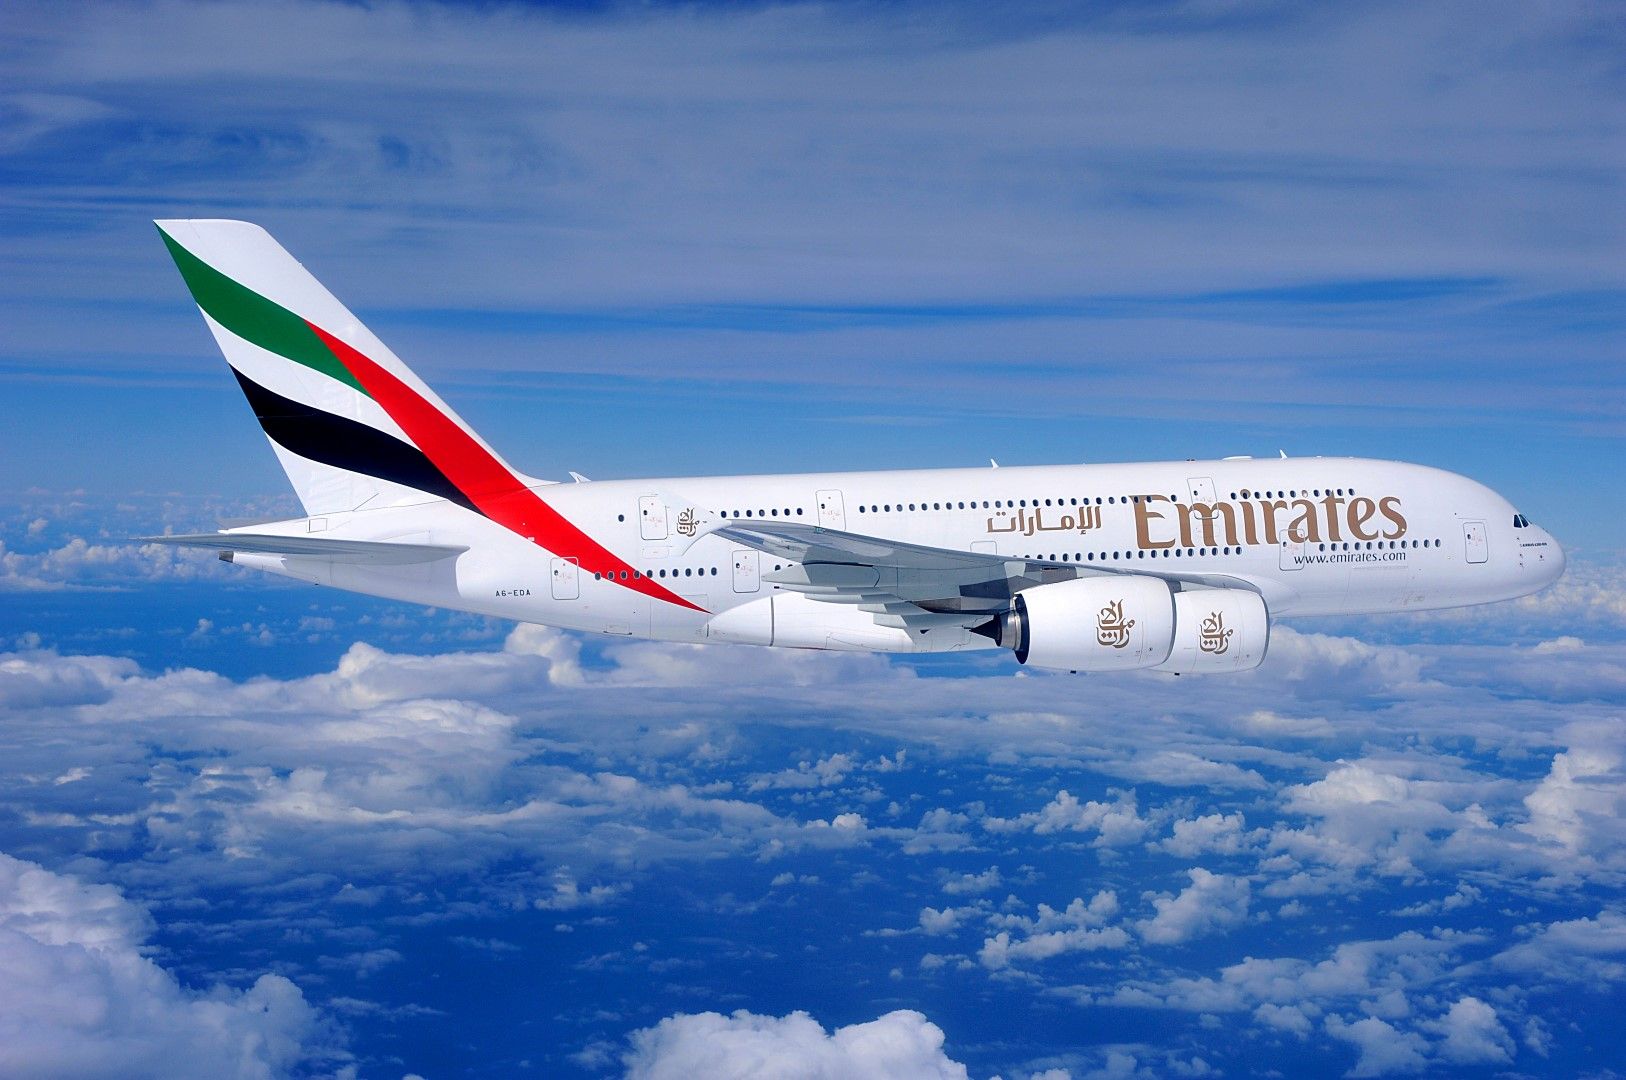 The world’s best airlines for 2016 have been announced